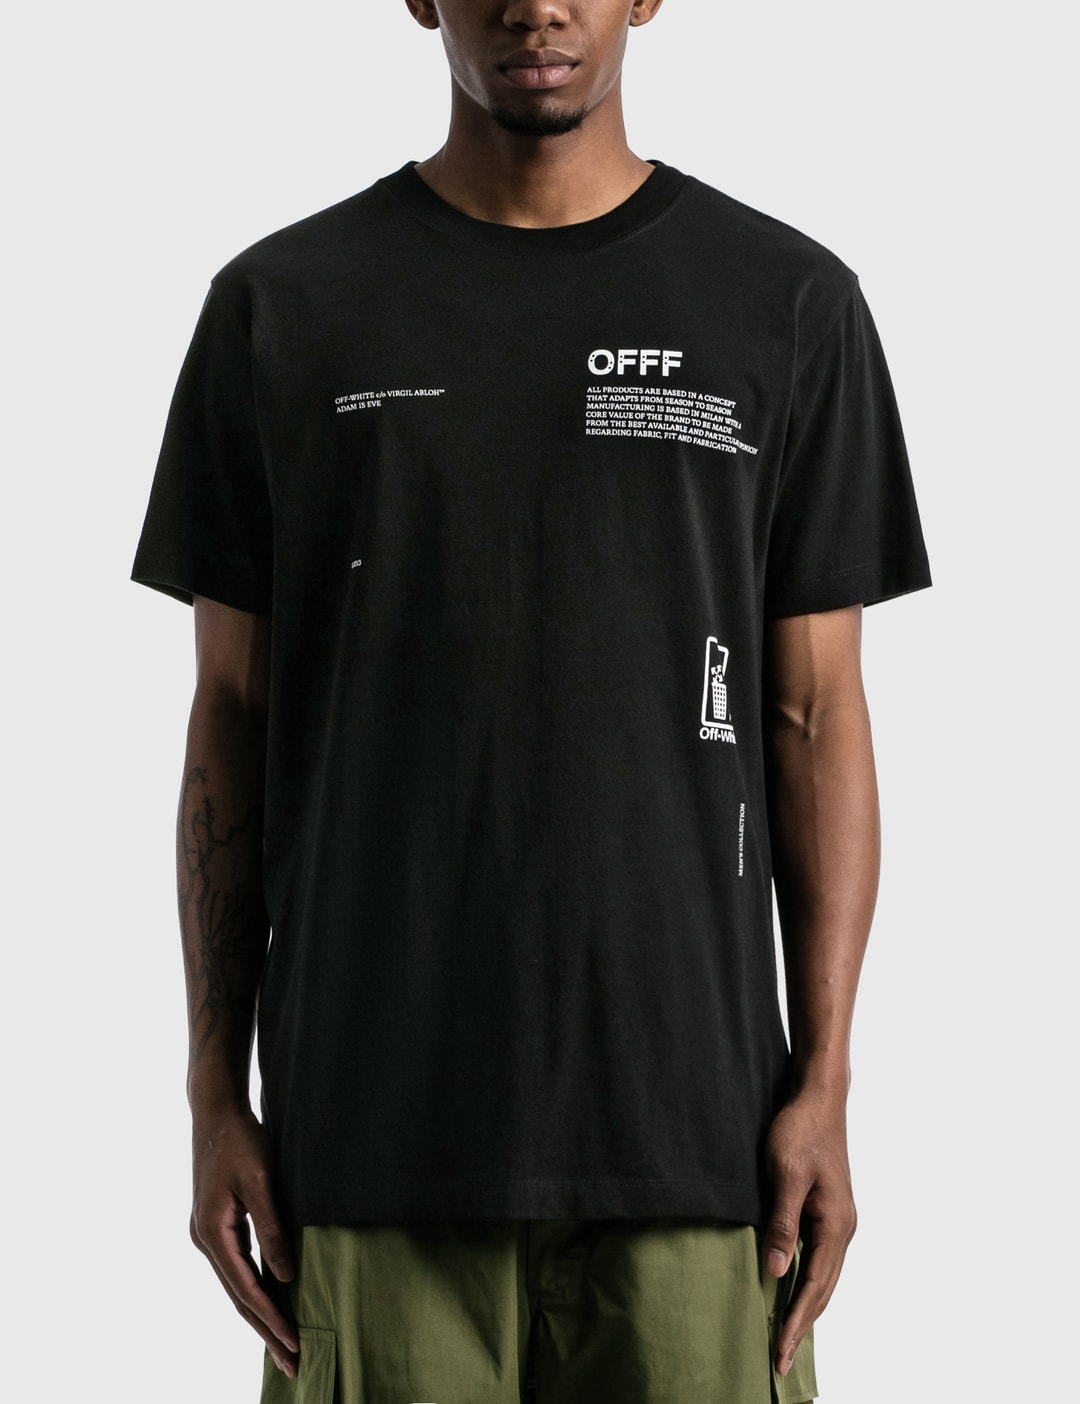 Off-White™ - Take Care Arrow HBX by Slim Hypebeast | T-shirt and Fashion Curated Globally - Lifestyle